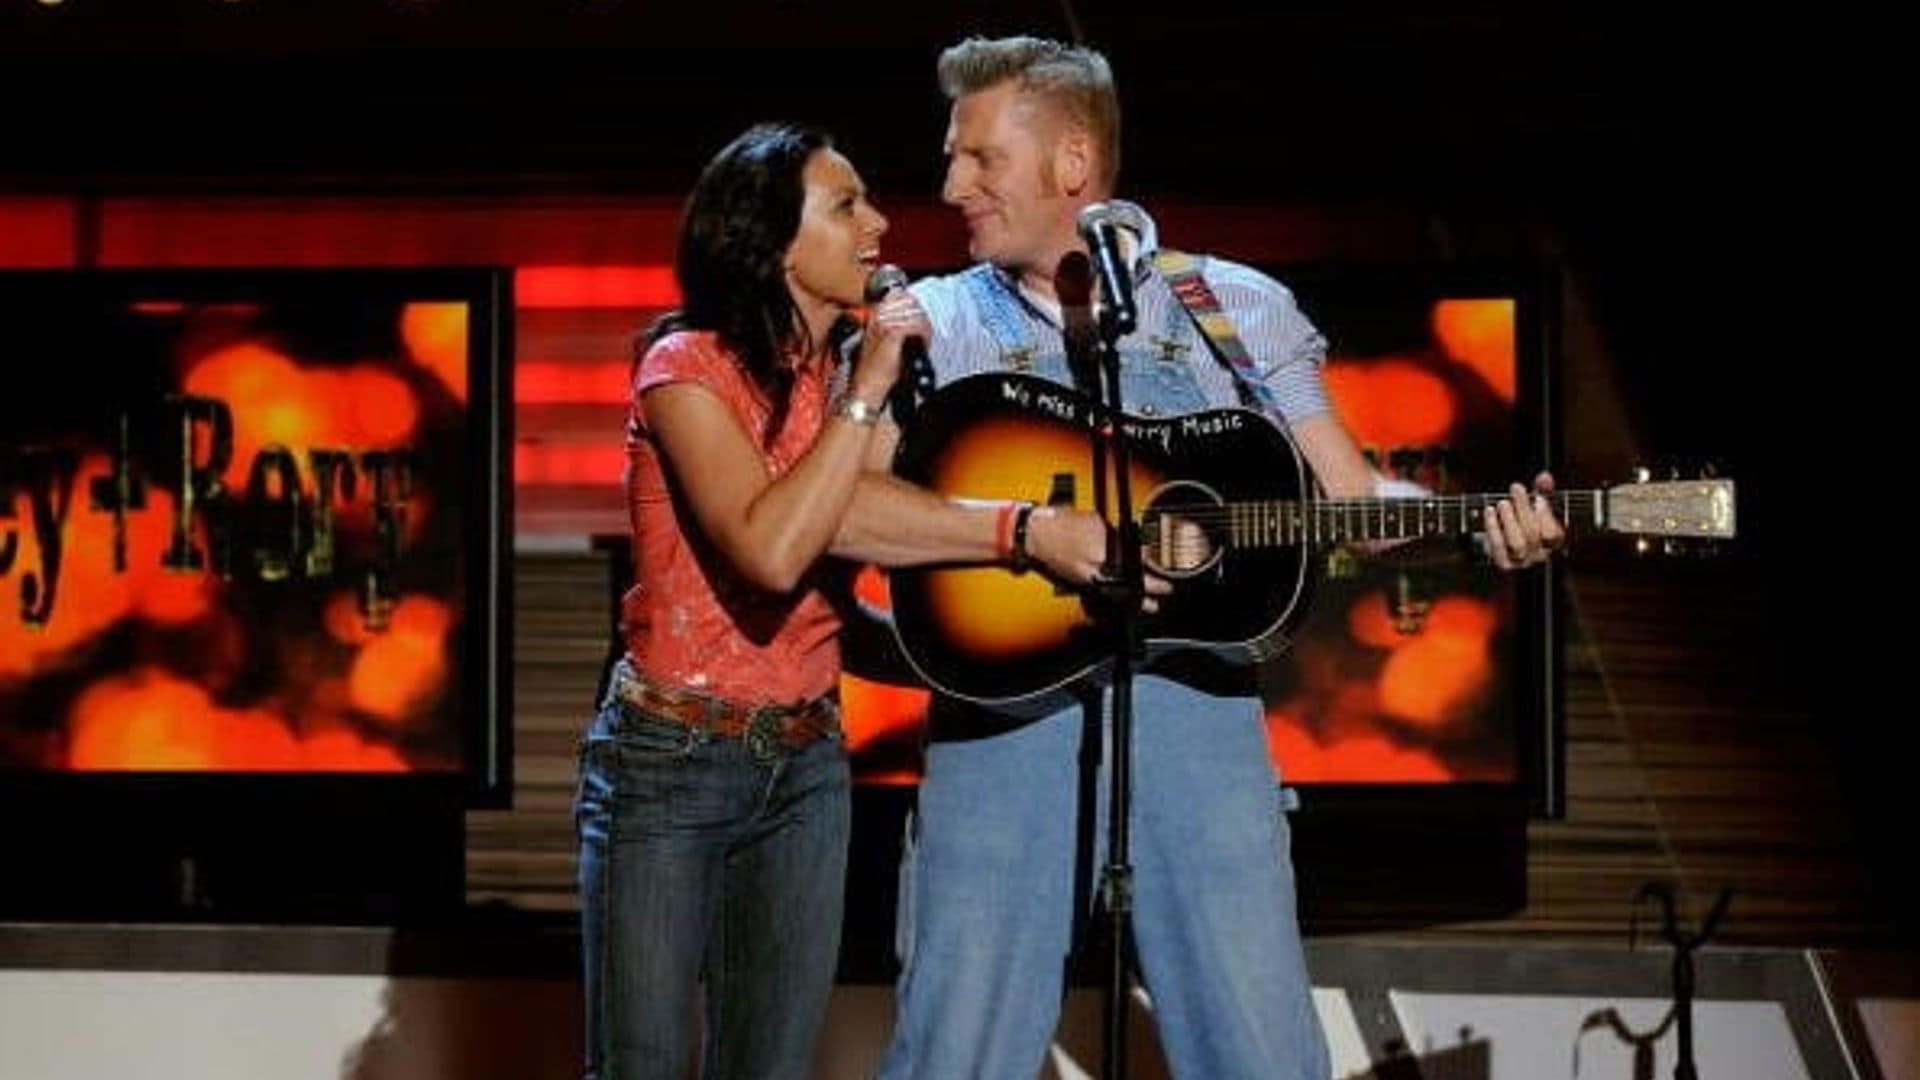 Country singer Joey Feek is 'at peace' as she enters hospice